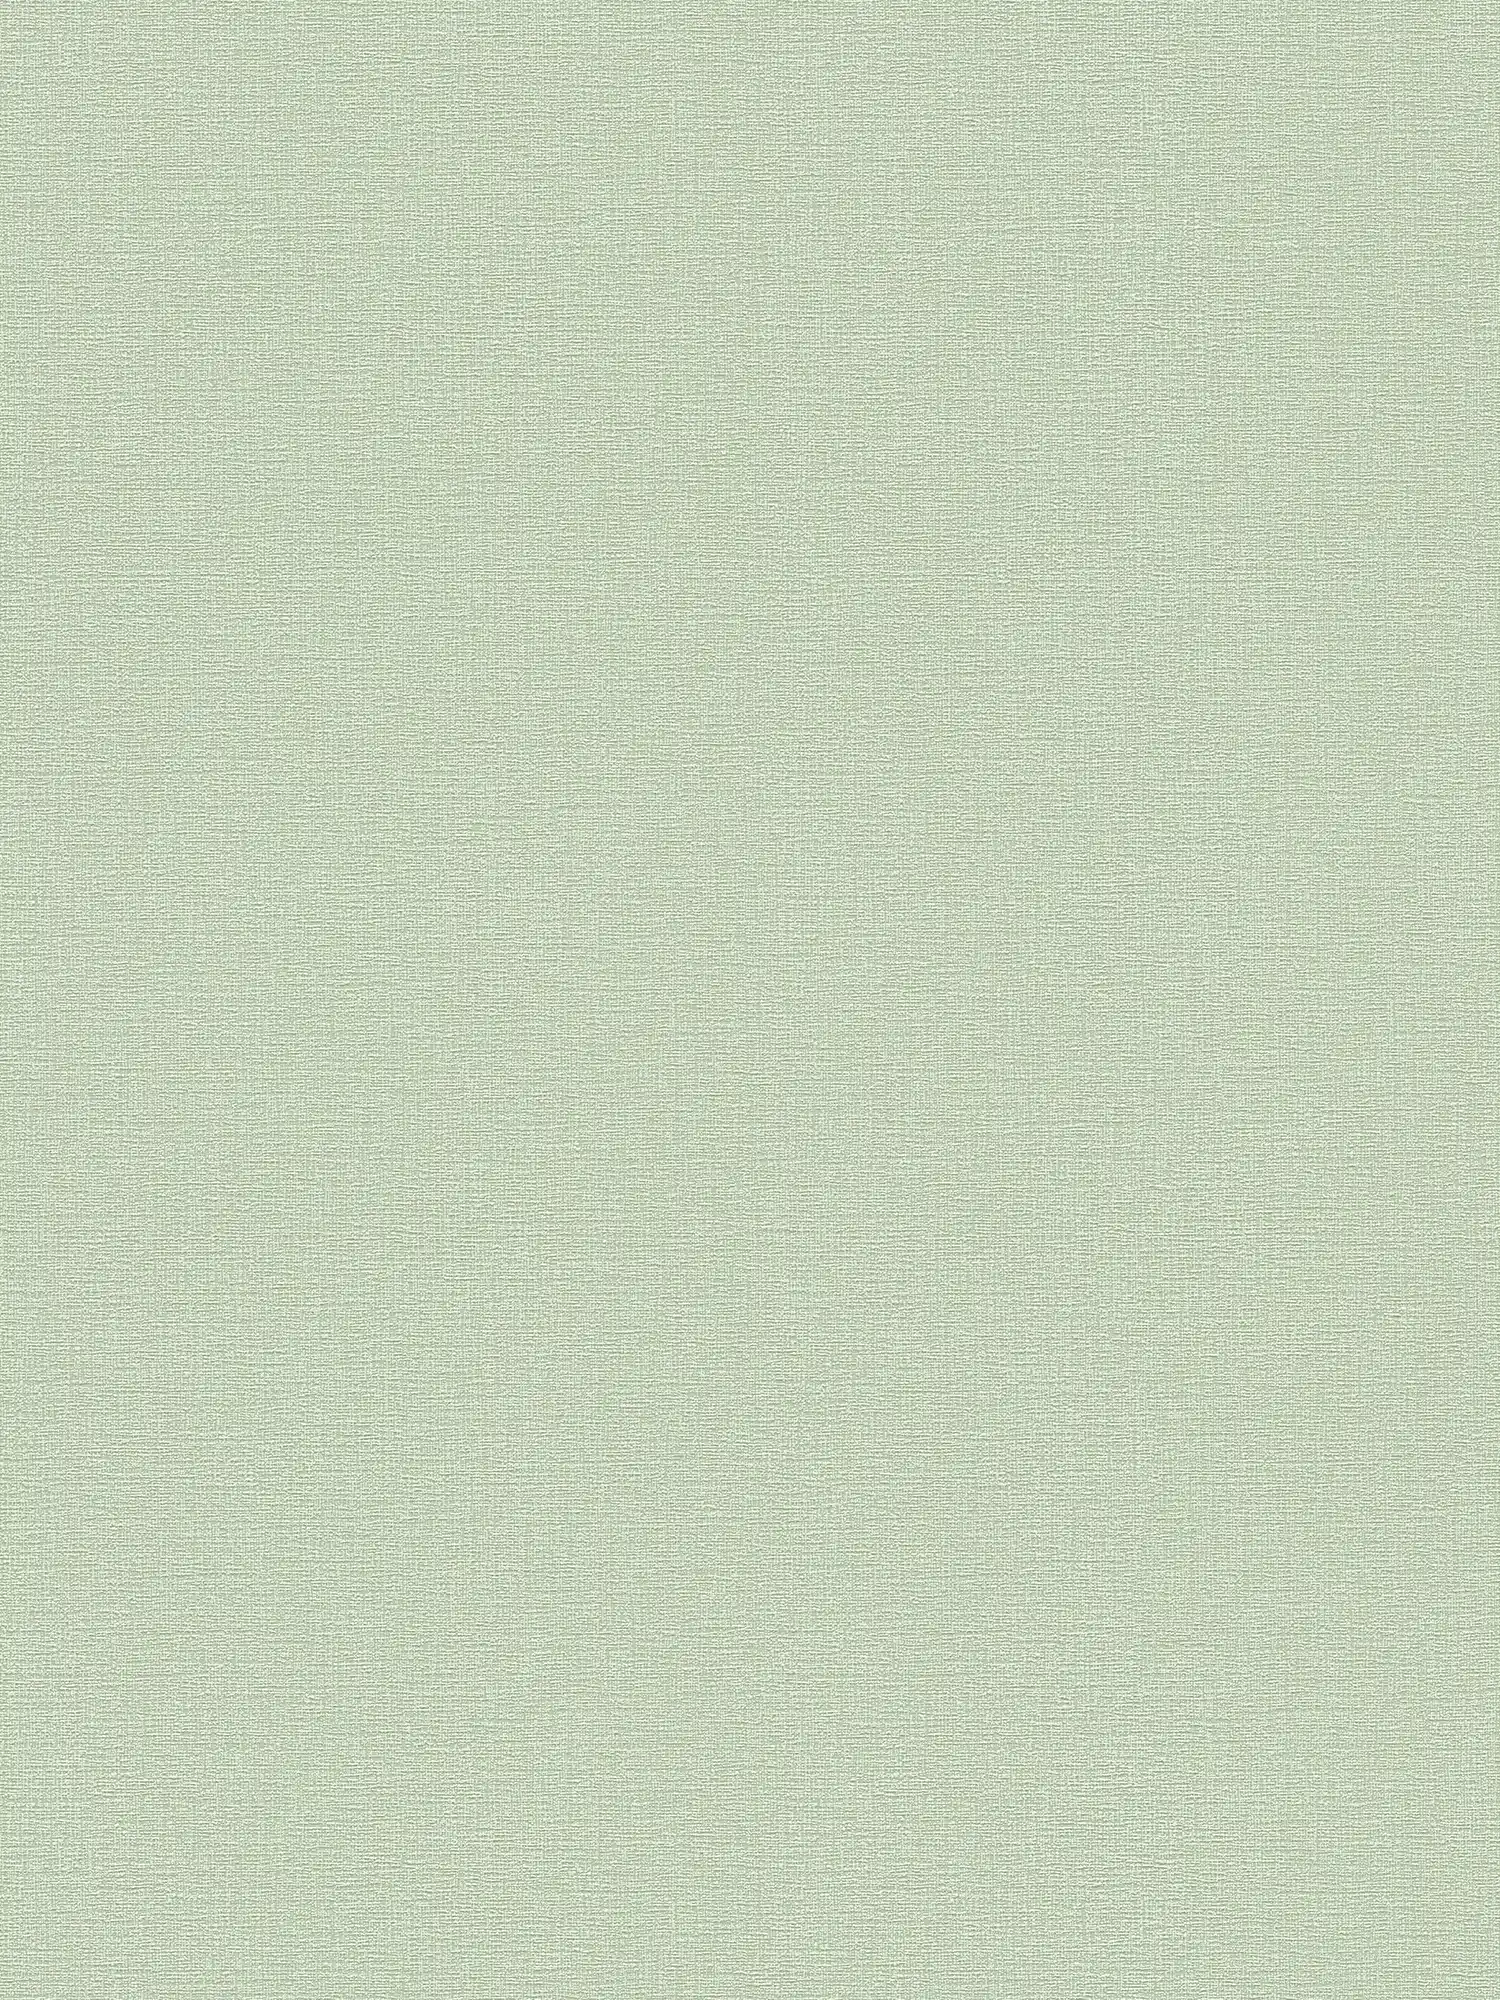 Wallpaper natural style, plain with textured pattern - green, white
